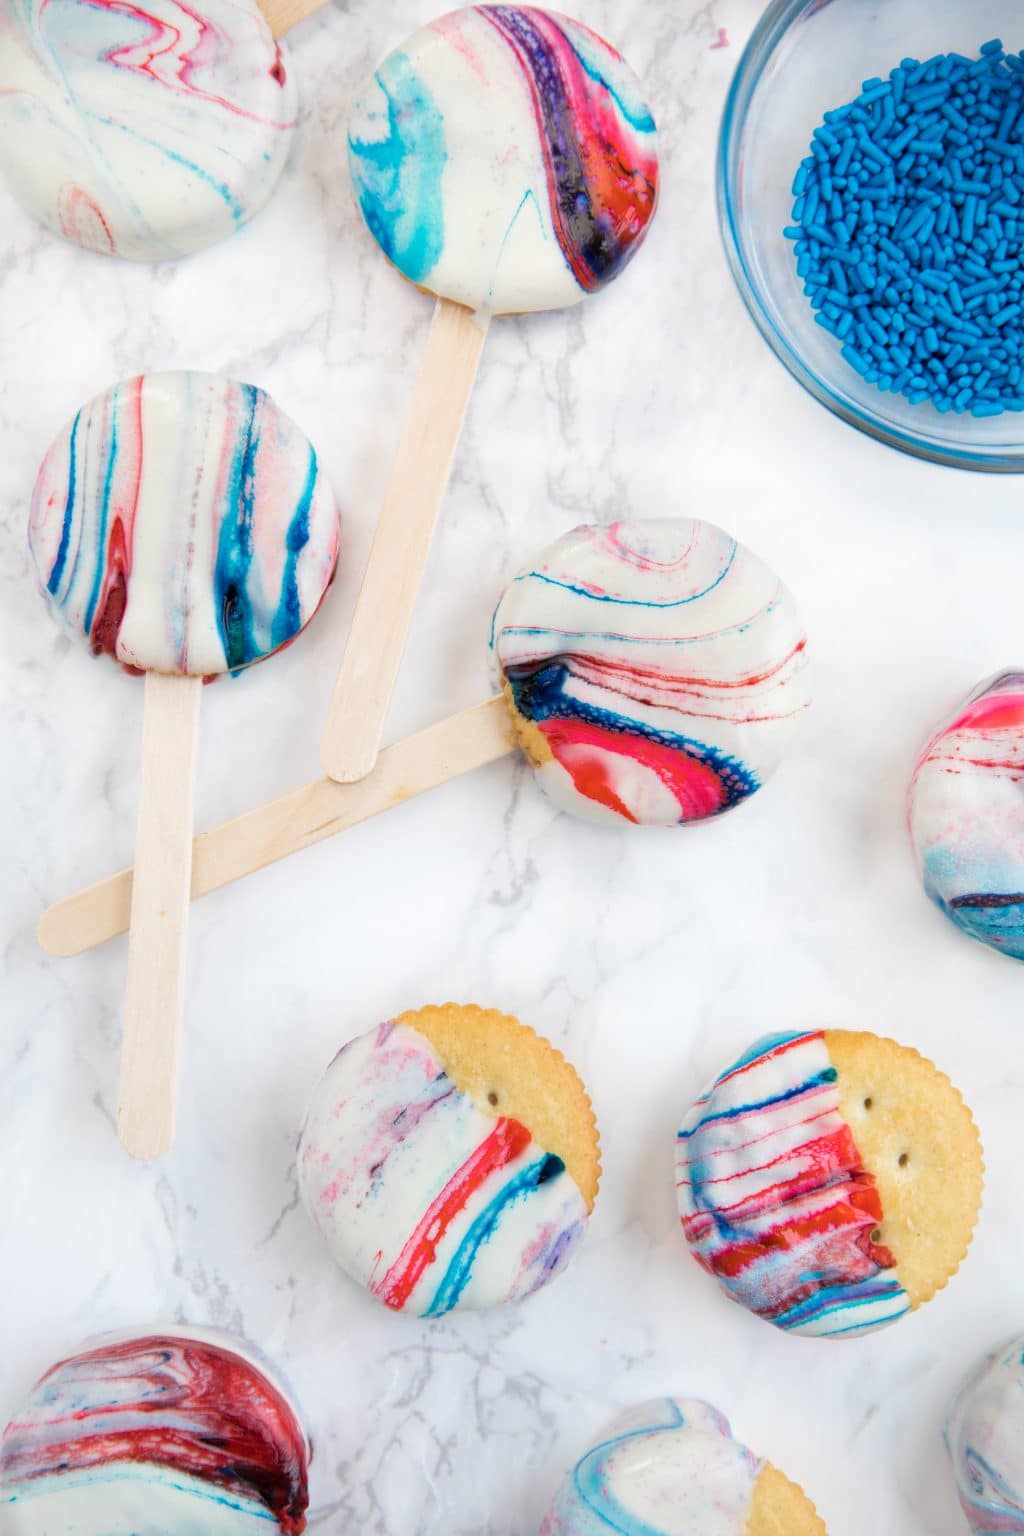 Creamy Peanut Butter Sandwiched between Buttery RITZ Cracker and dipped in swirled Red, White, and Blue melted white Chocolate